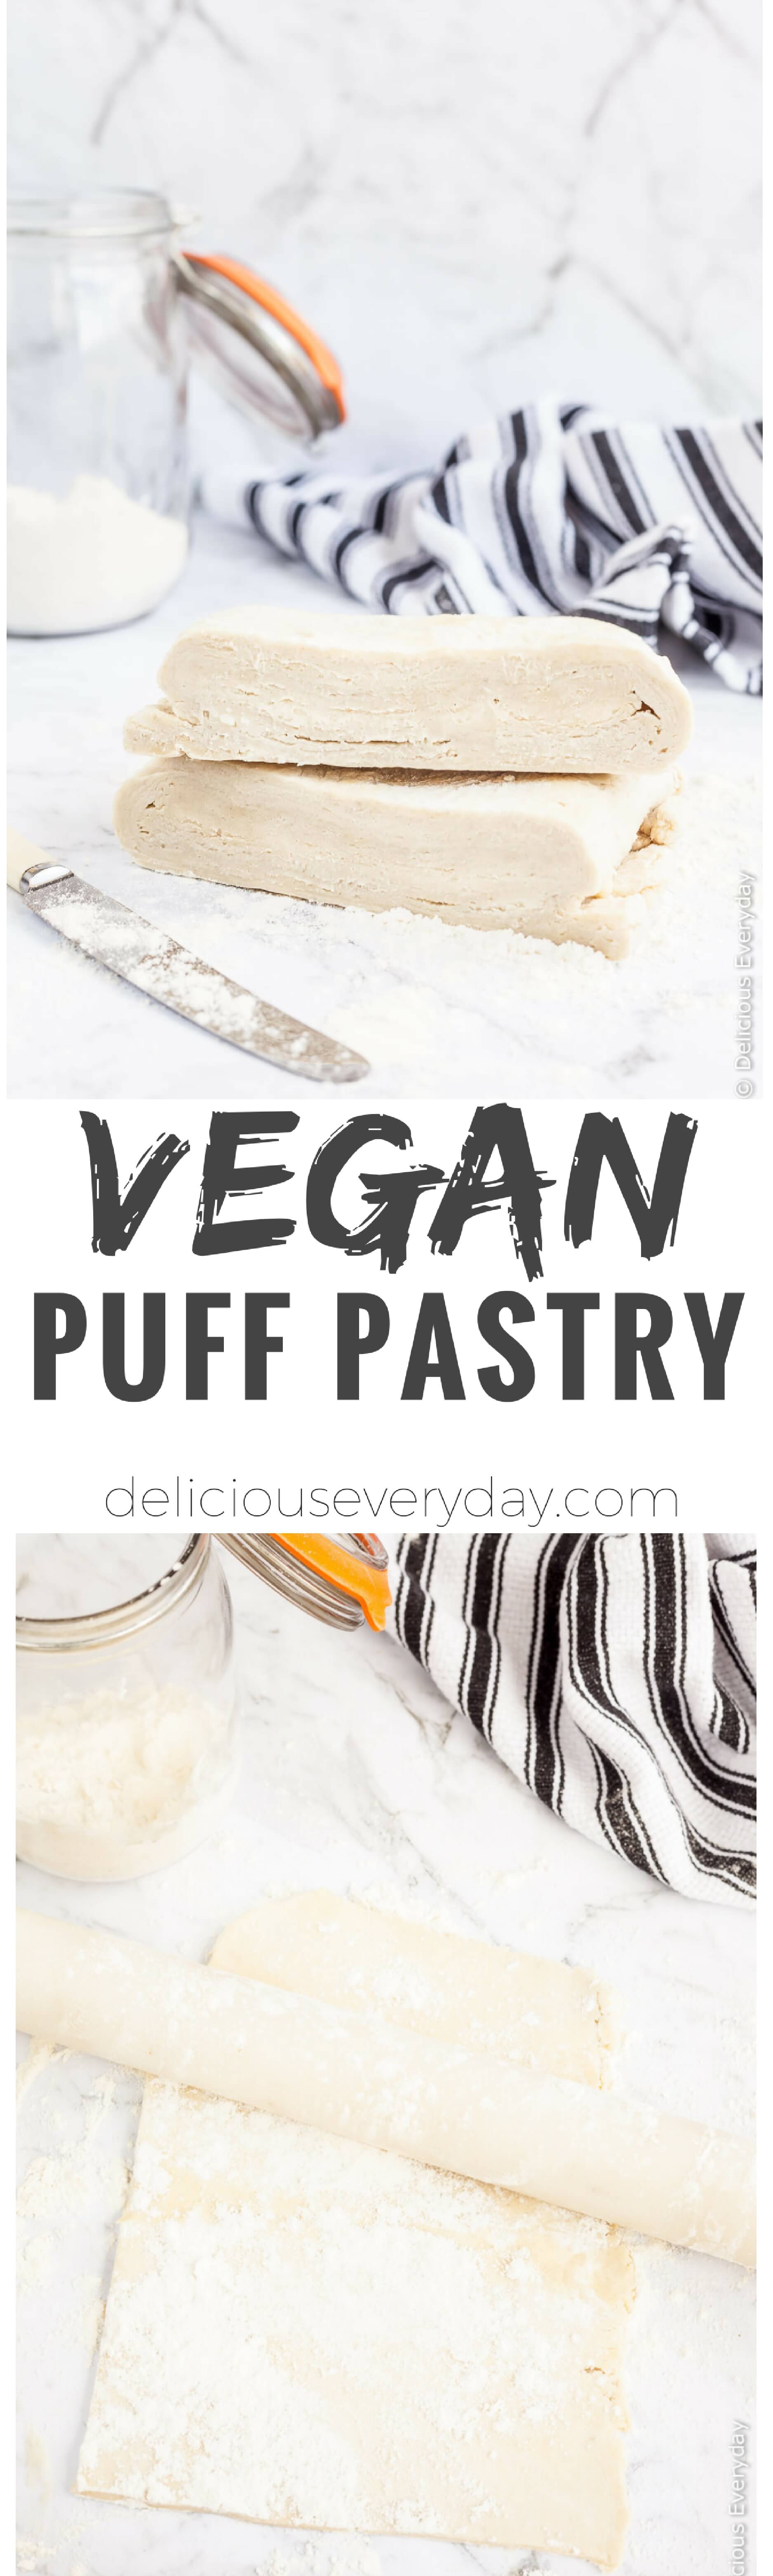 How to make vegan puff pastry from scratch! Don't buy store bought chemical laden rubbish. This stuff is the real deal!